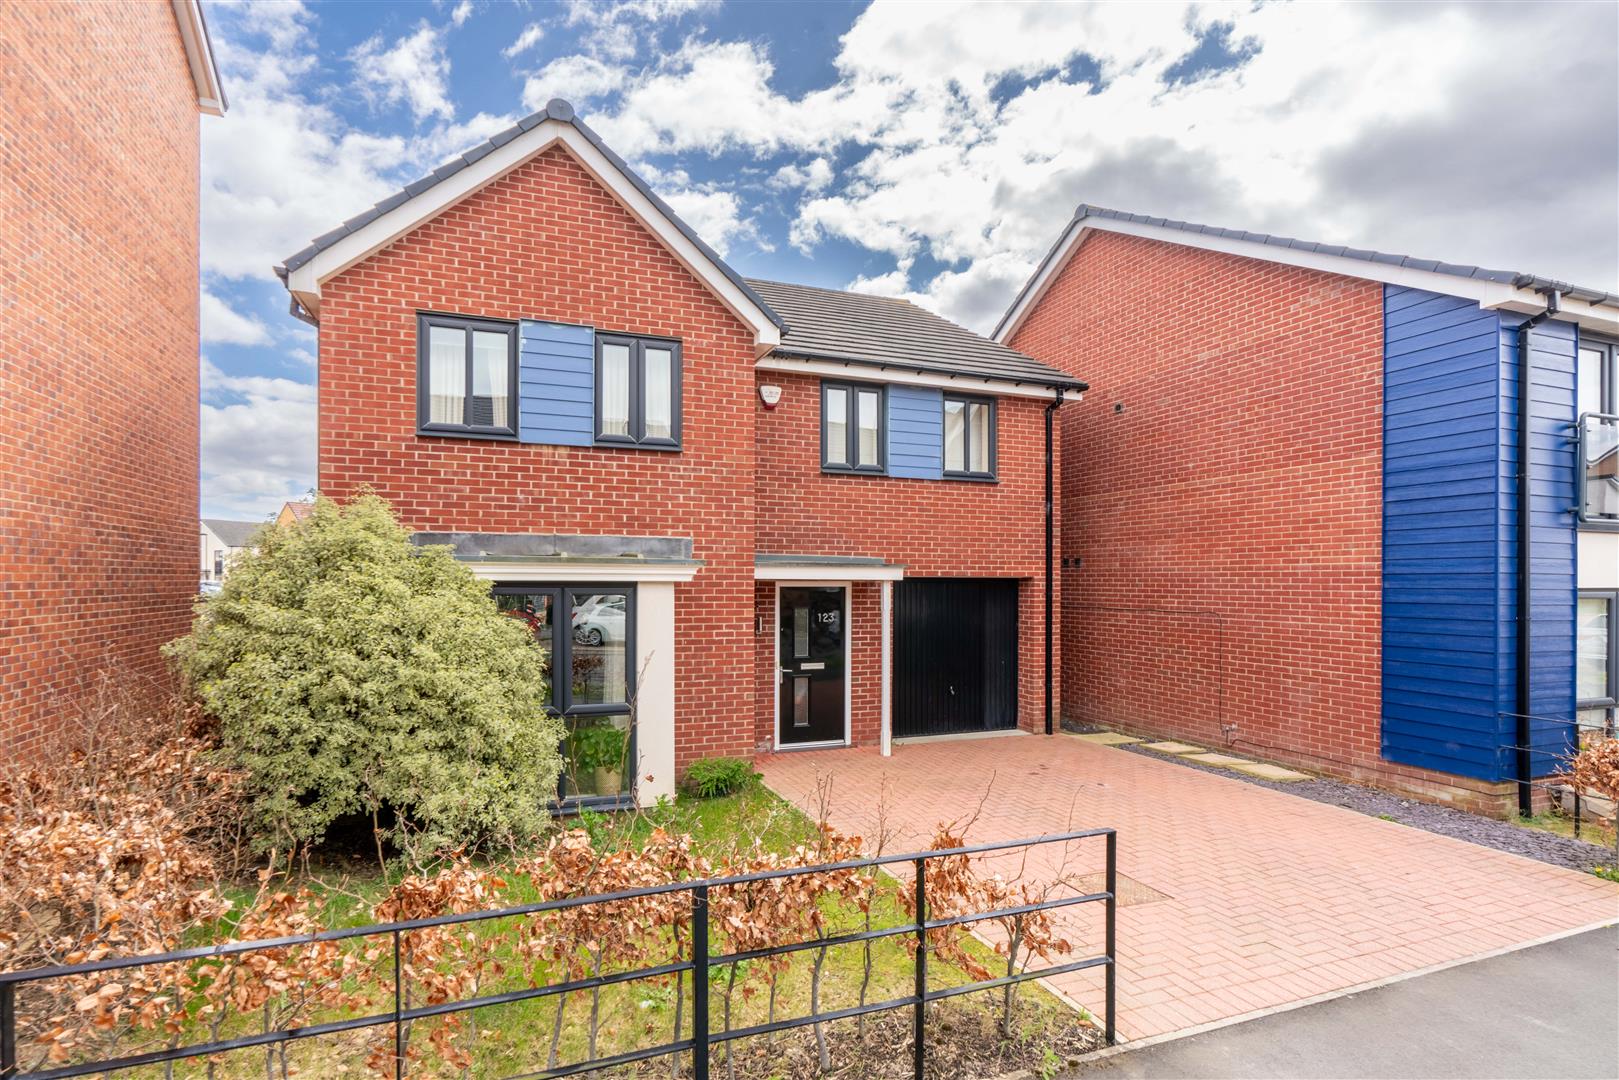 4 bed detached house for sale in Roseden Way, Great Park - Property Image 1